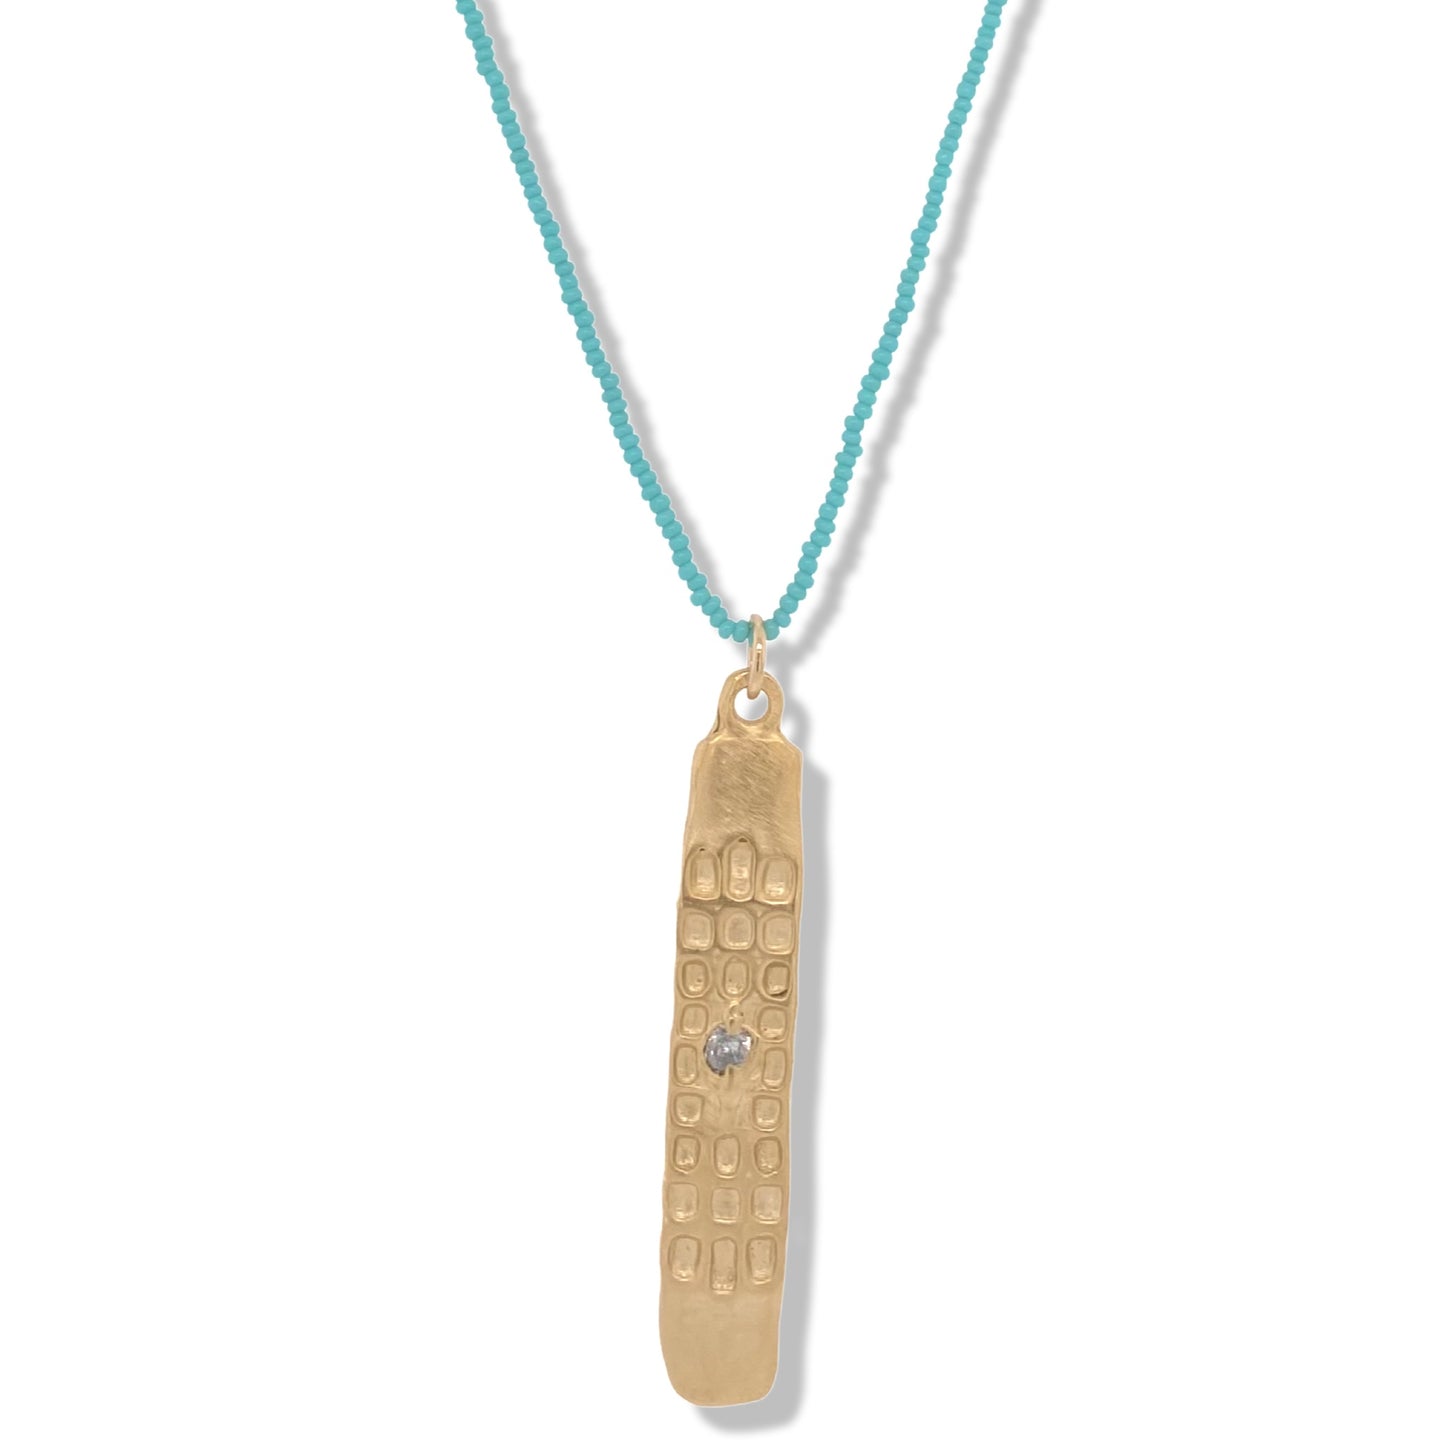 252NLGTU - Miya Imprint Necklace in Gold on Turquoise Beads